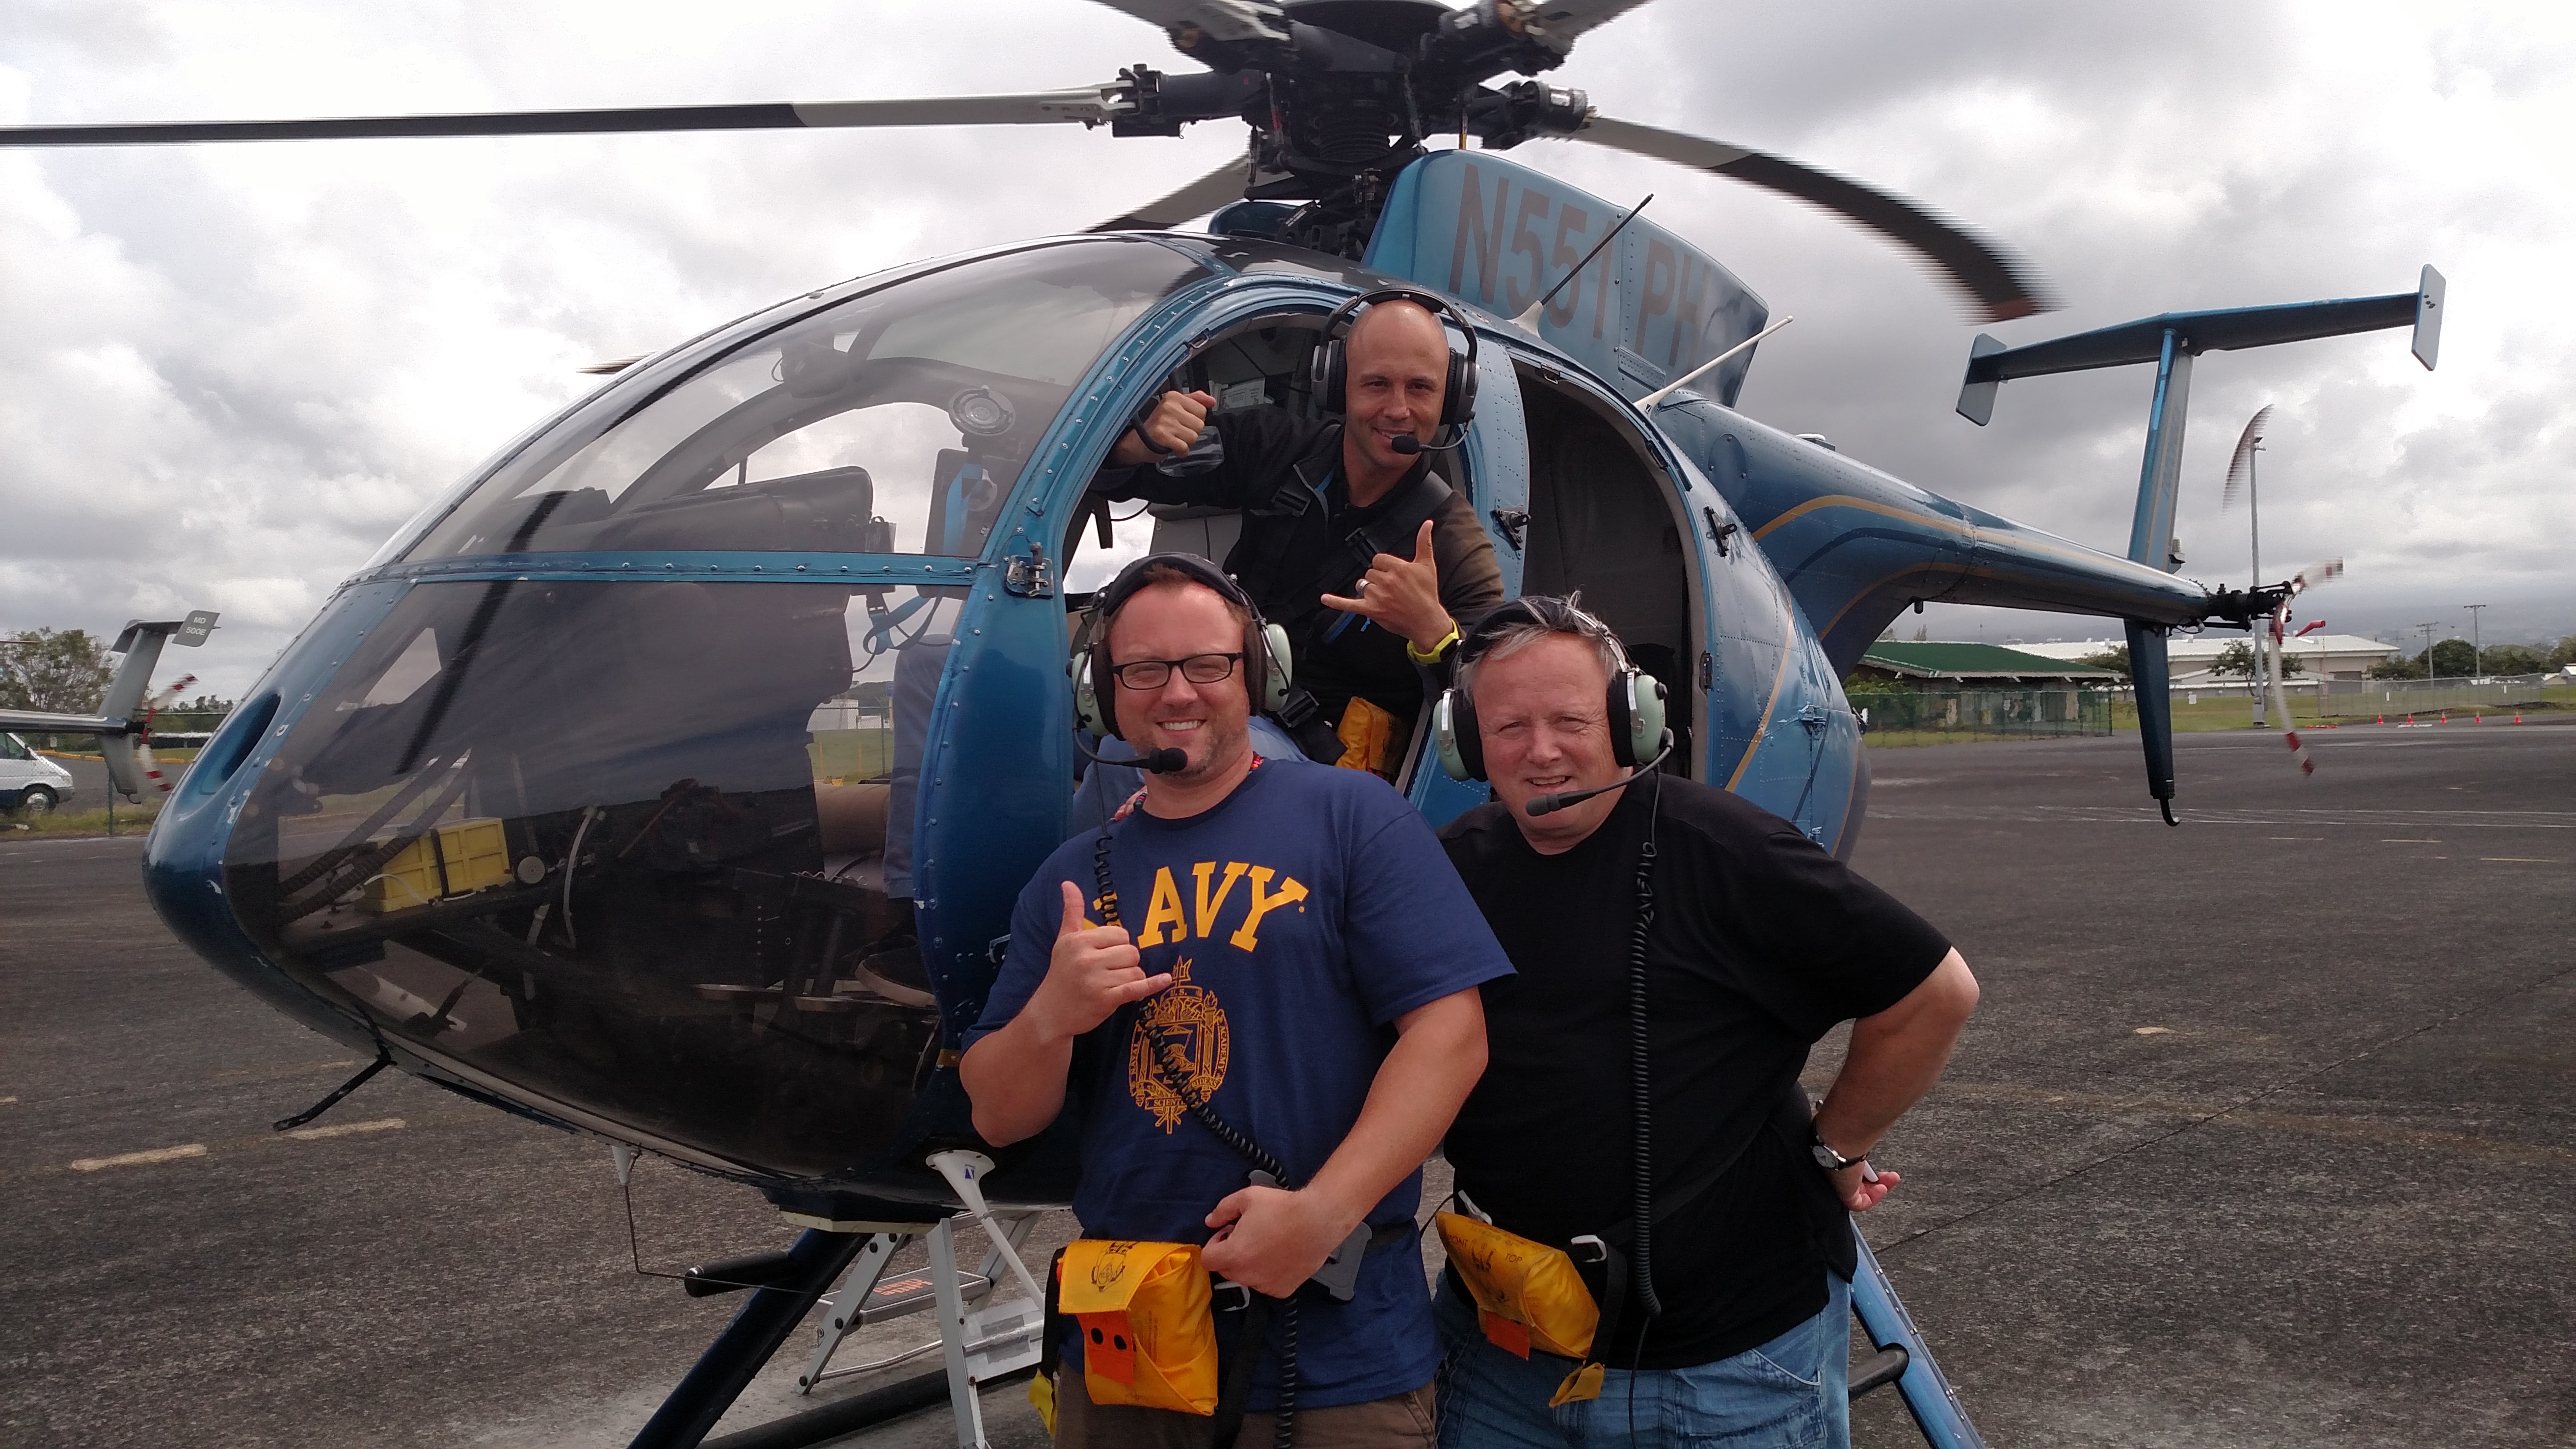 Bill Ehrin; Paradise Helicopter Tours; Hilo, Hawaii